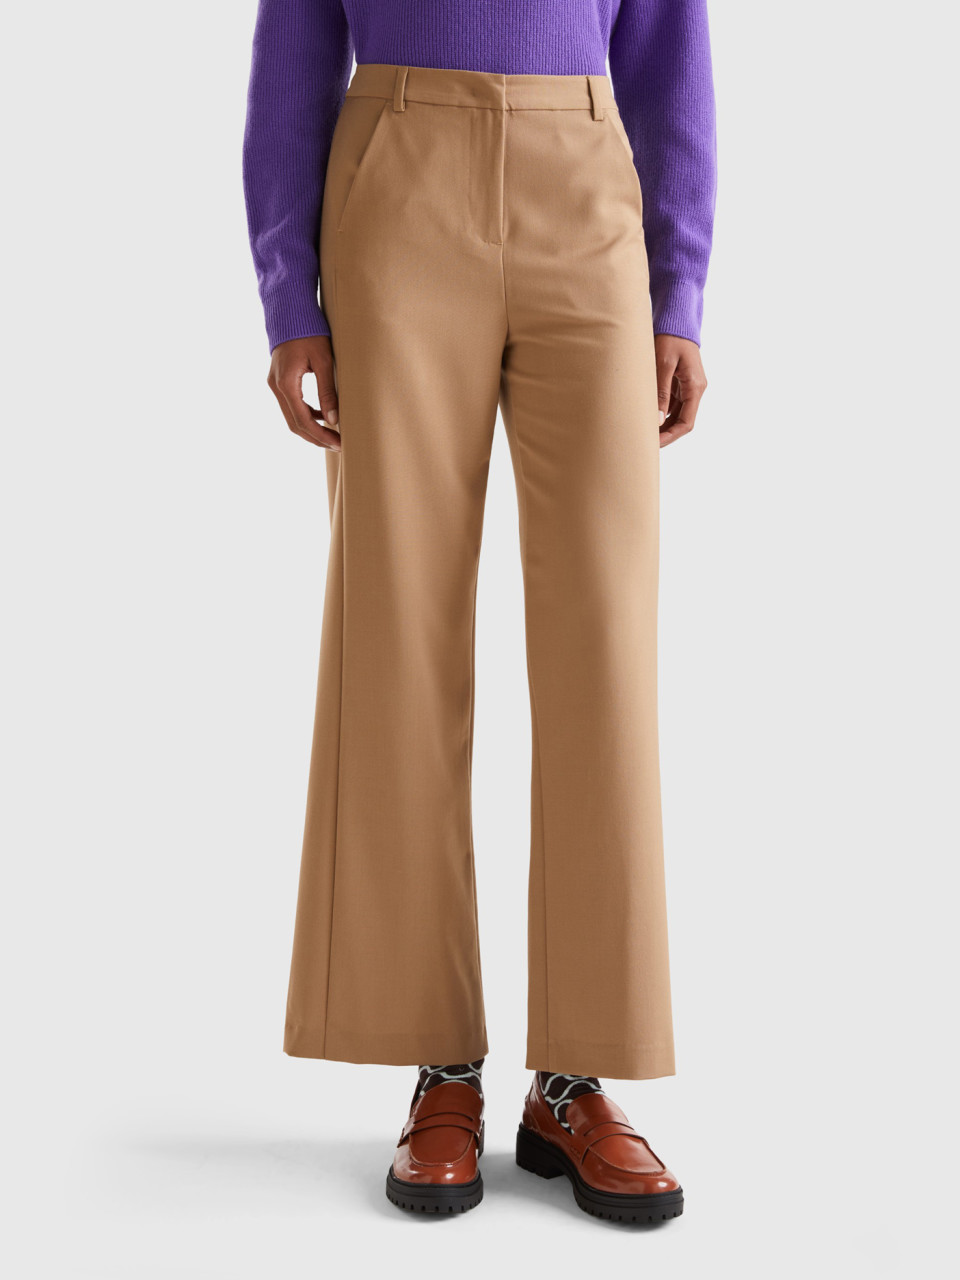 Benetton, Flowy Trousers With Tapered Leg, Camel, Women